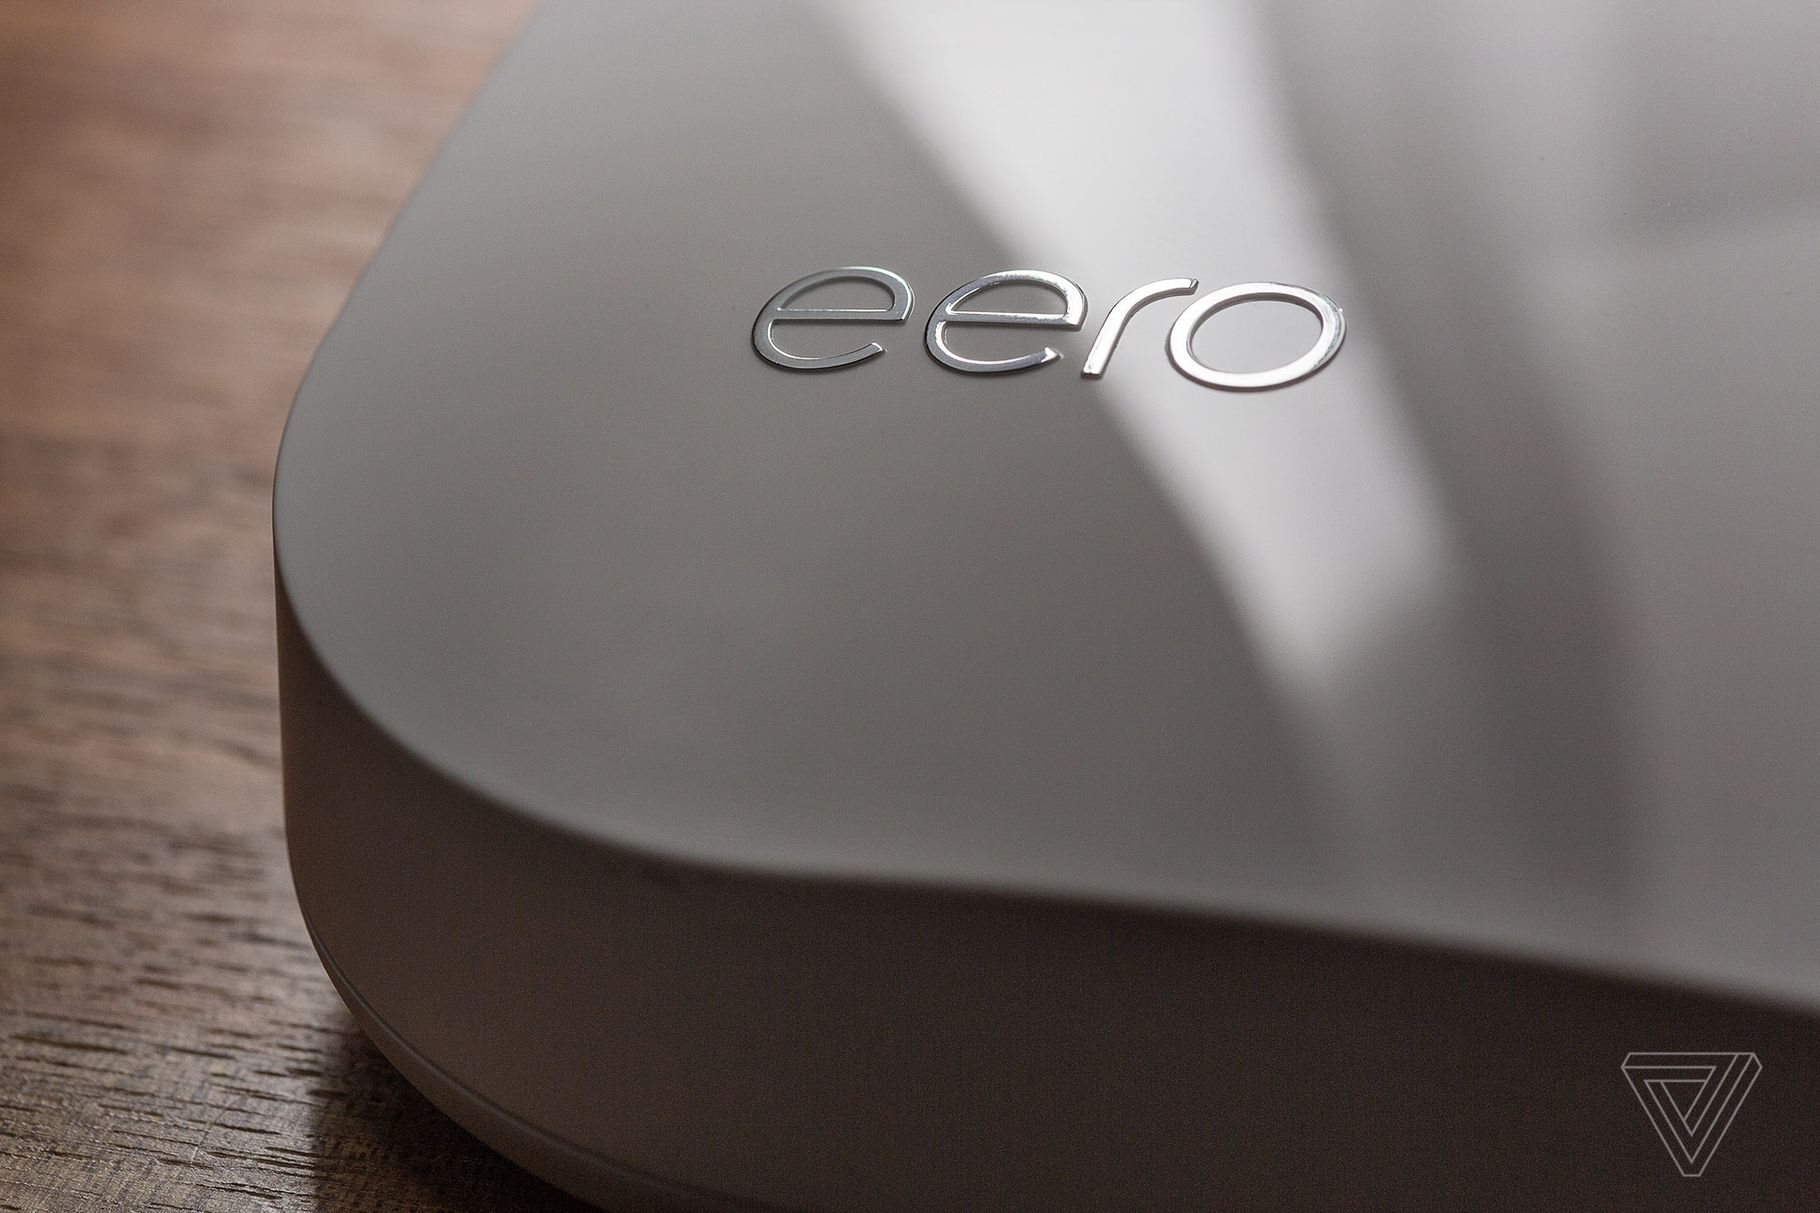 Apple is now selling Amazon’s Eero mesh routers on its website